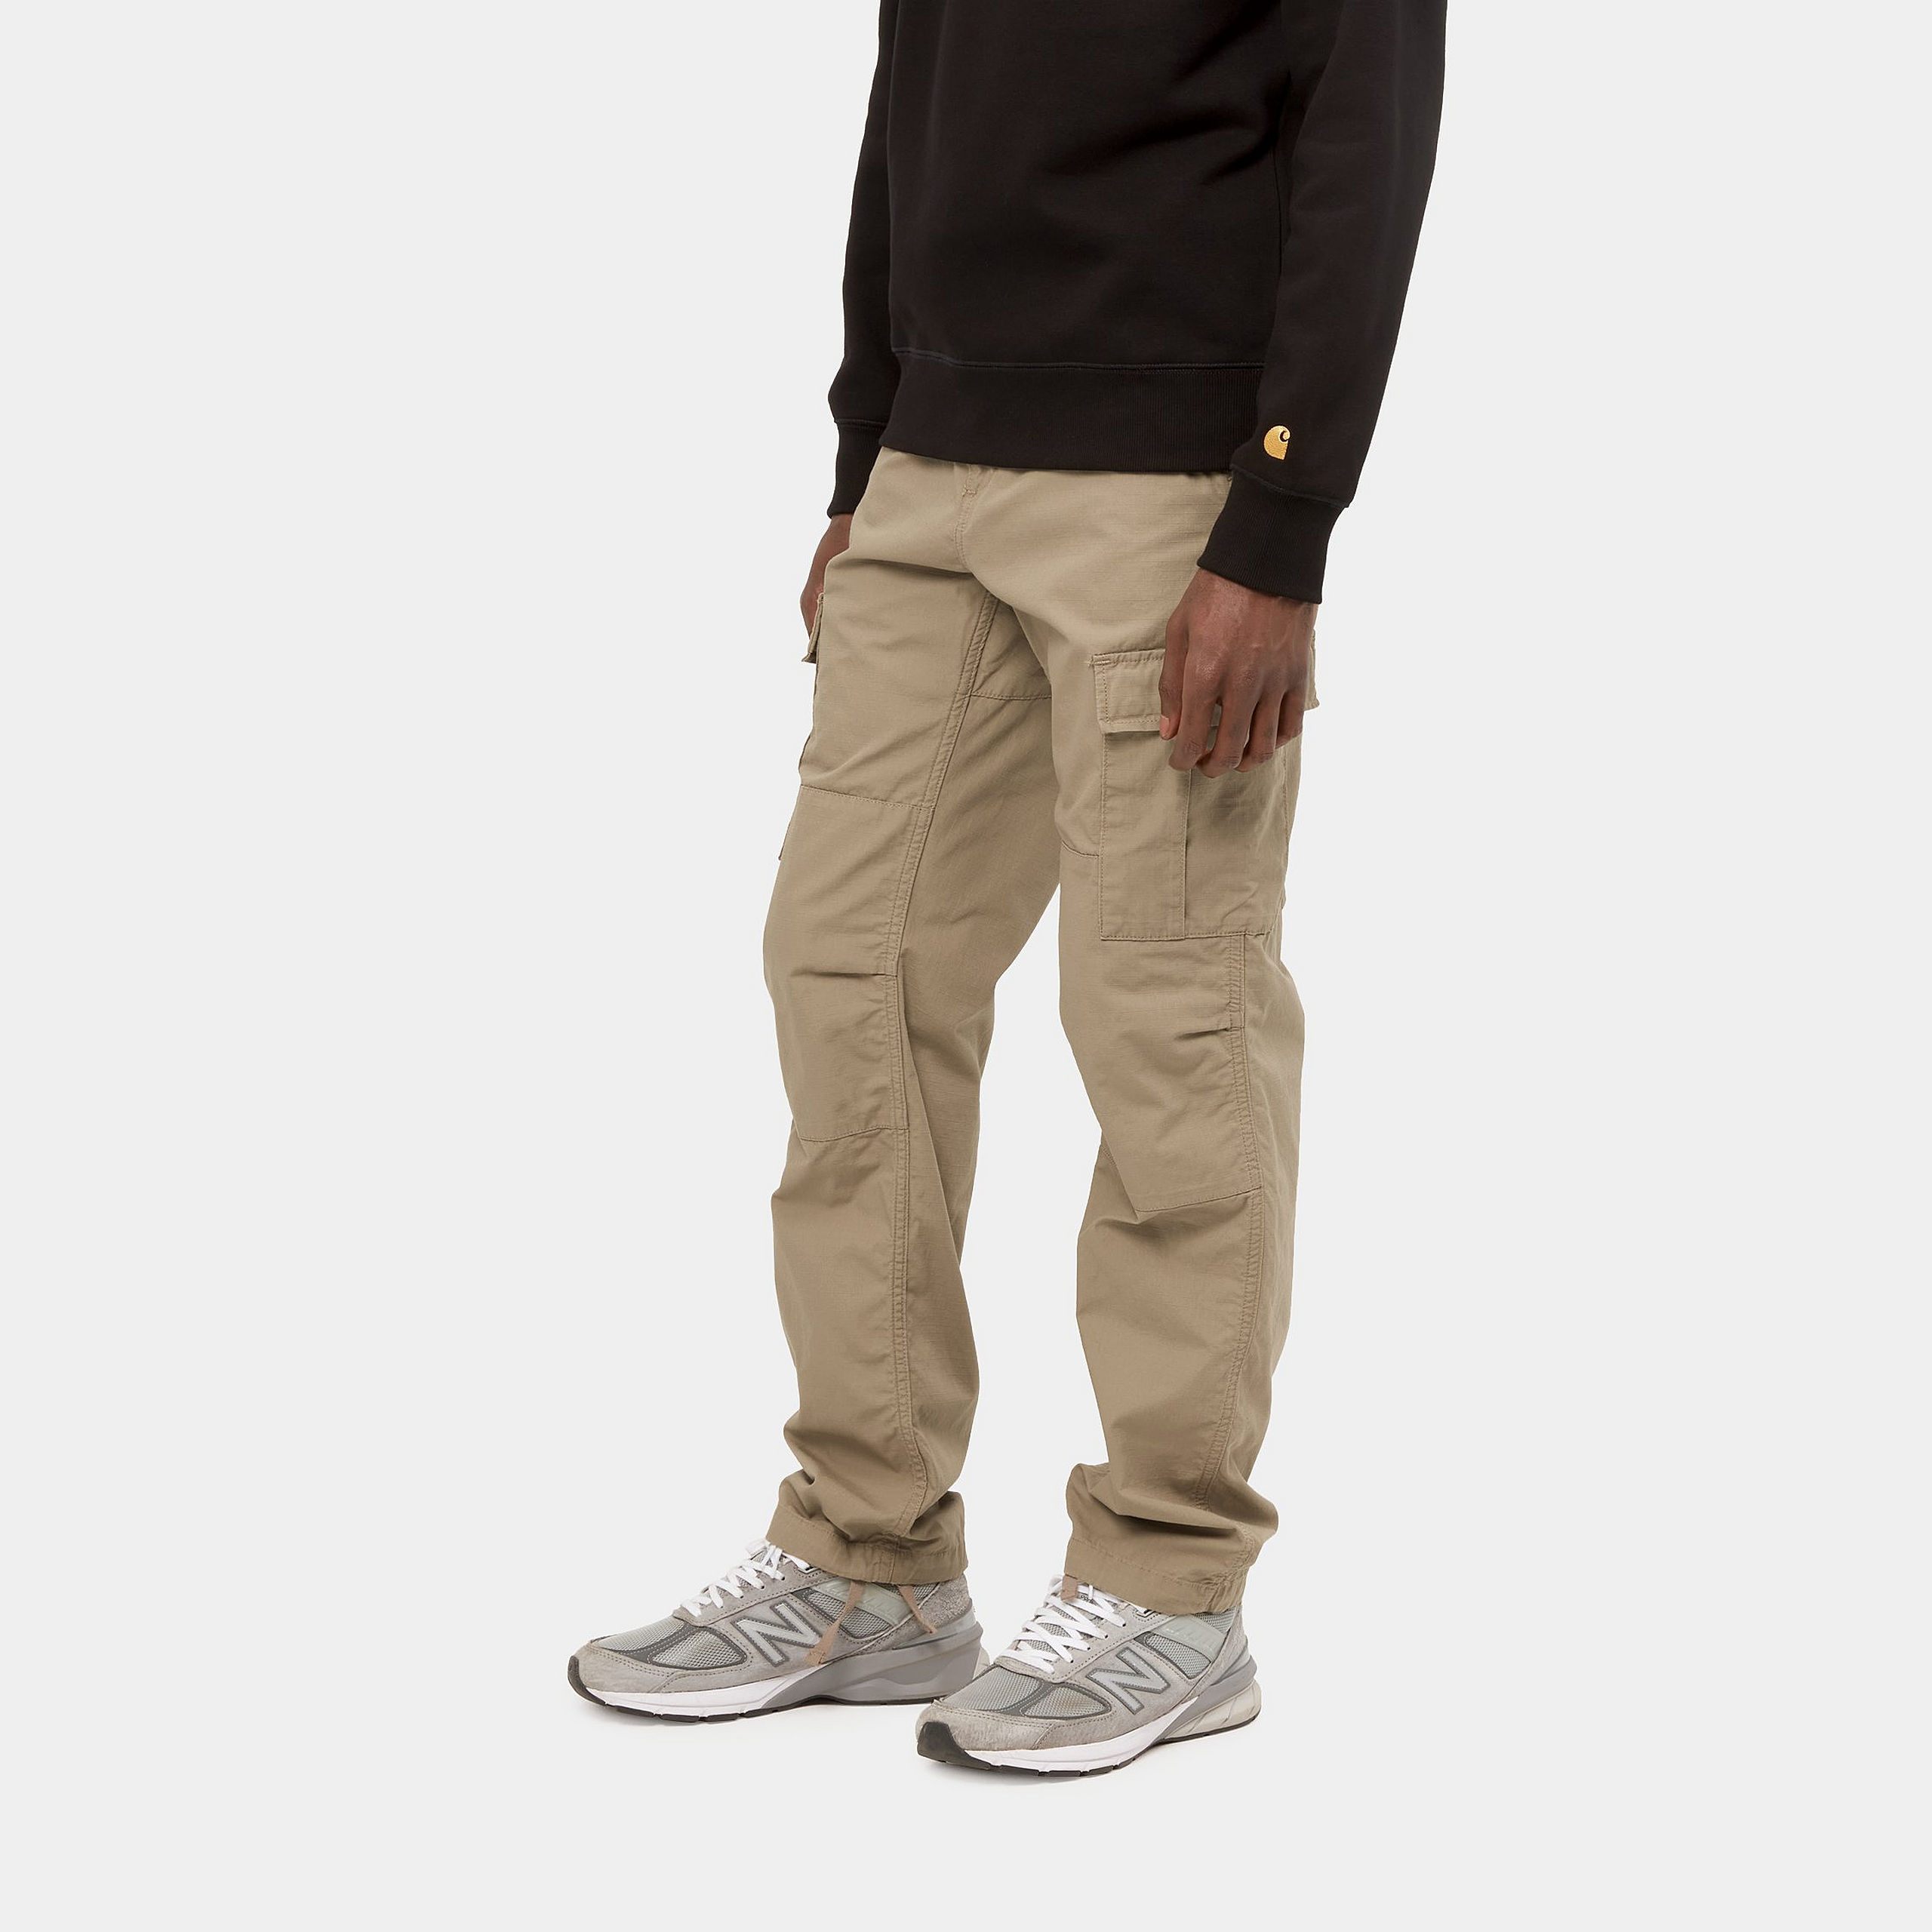 Carhartt WIP - AVIATION PANT - Leather (rinsed)